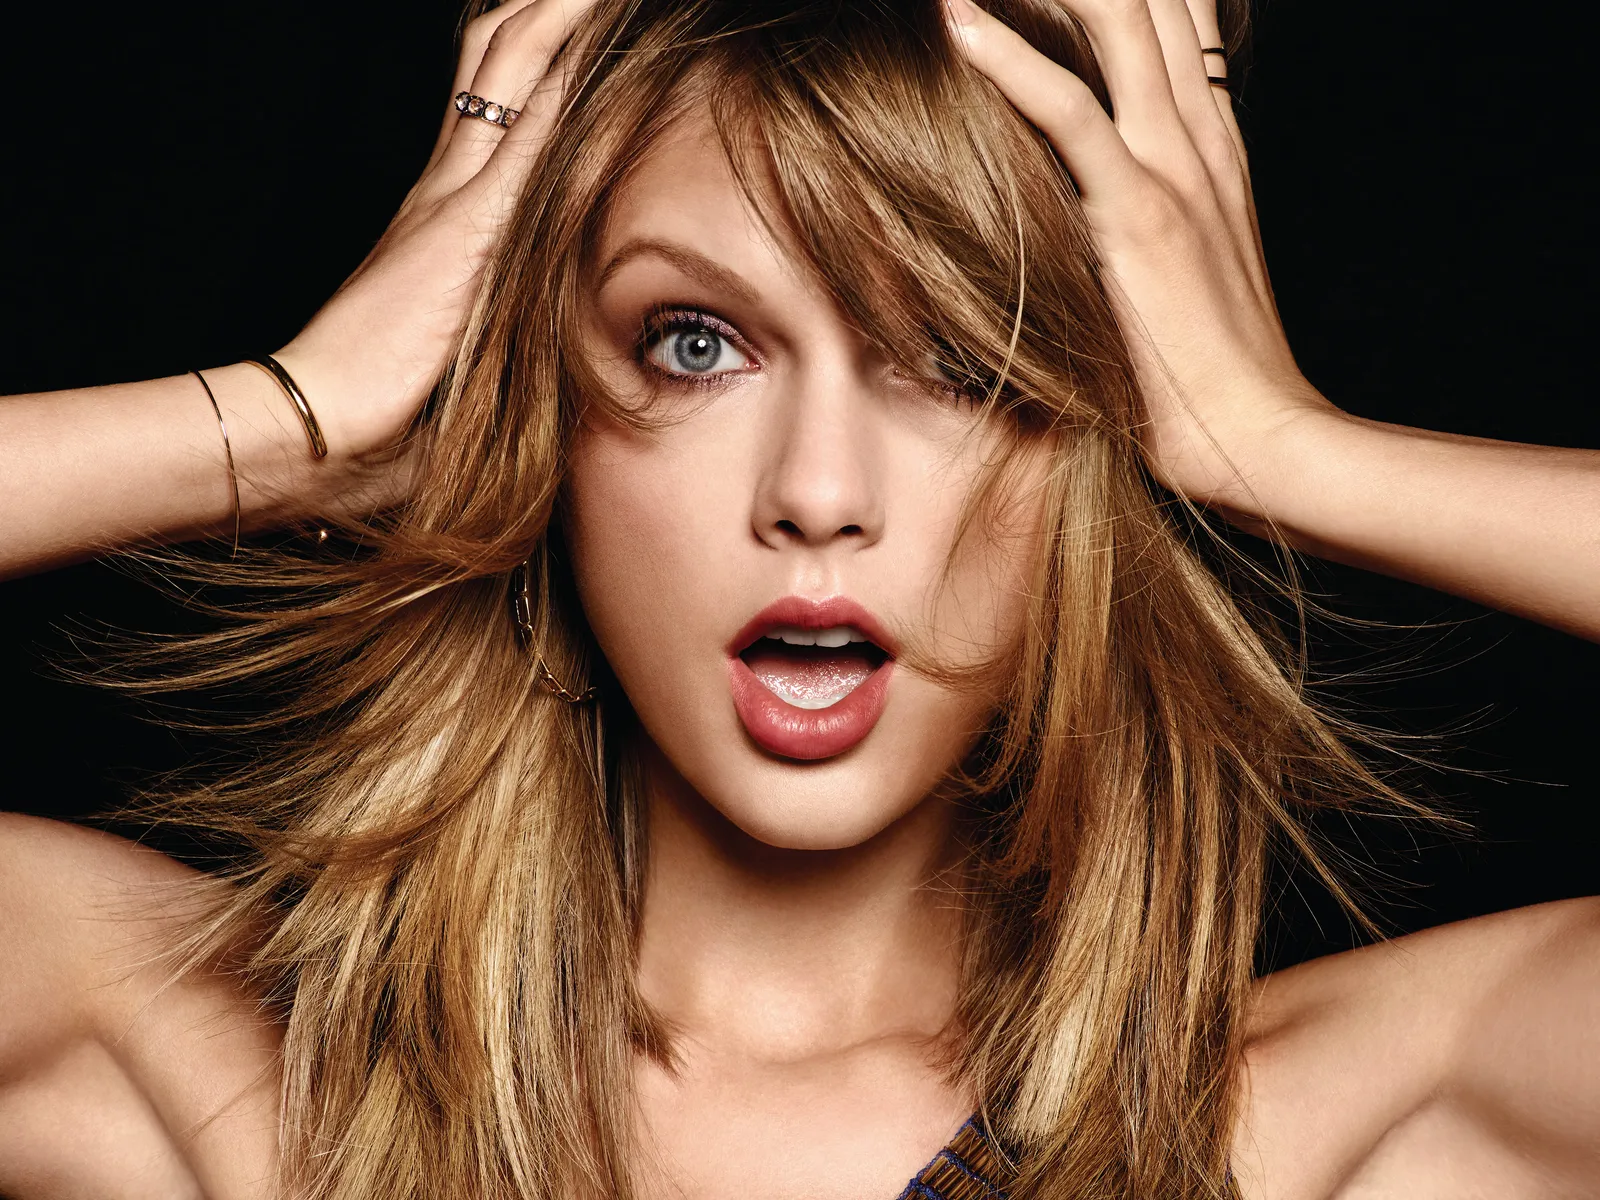 Taylor Swift's New Album Sets Records and Sparks Major Buzz in the Music Industry